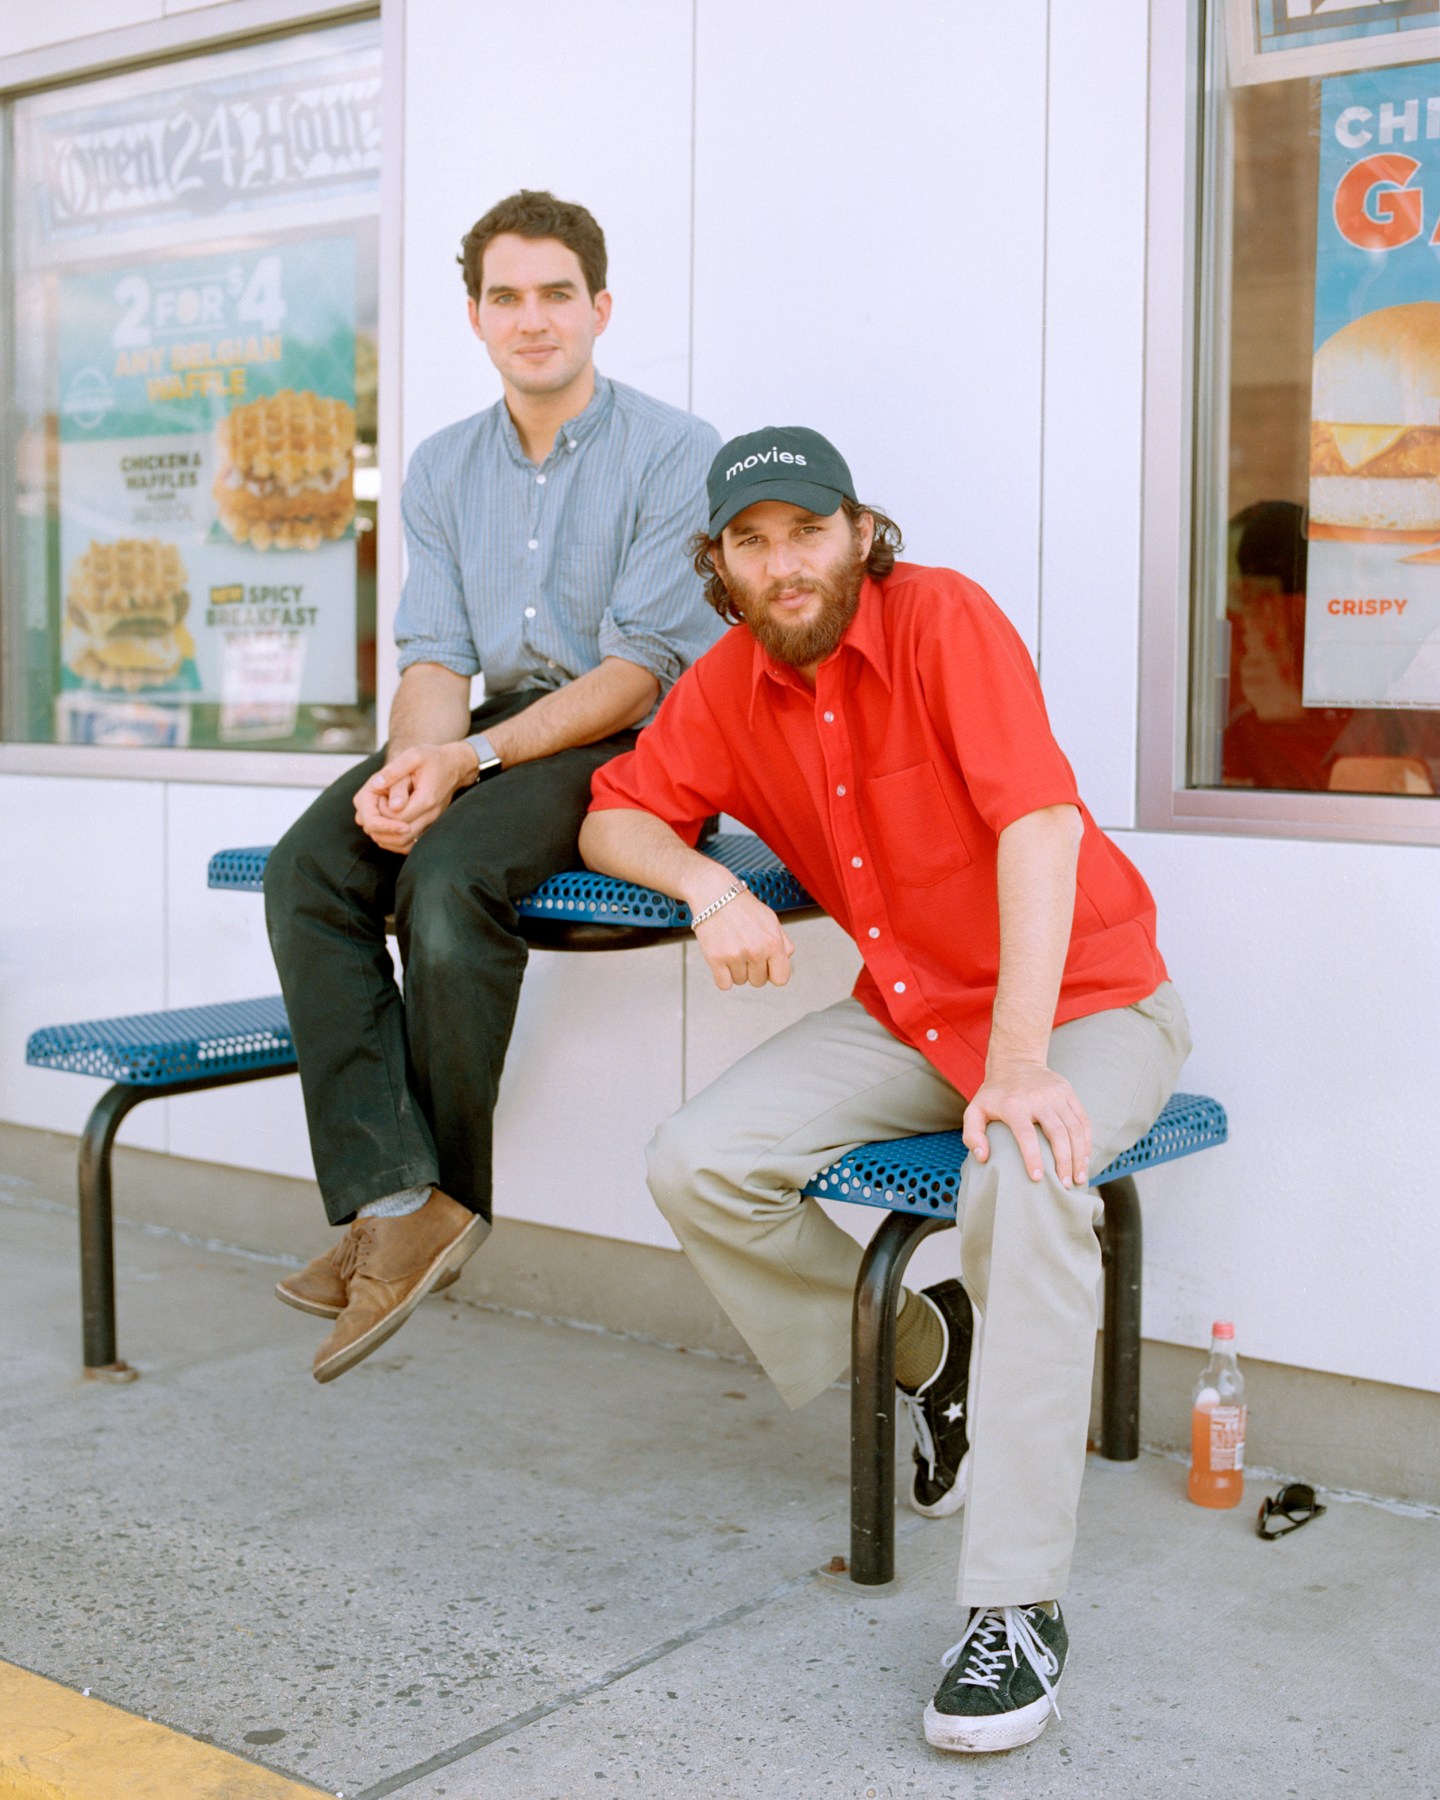 The Safdie Brothers Are Classic New York Hustlers. Their Movies Might Make Them Legends.